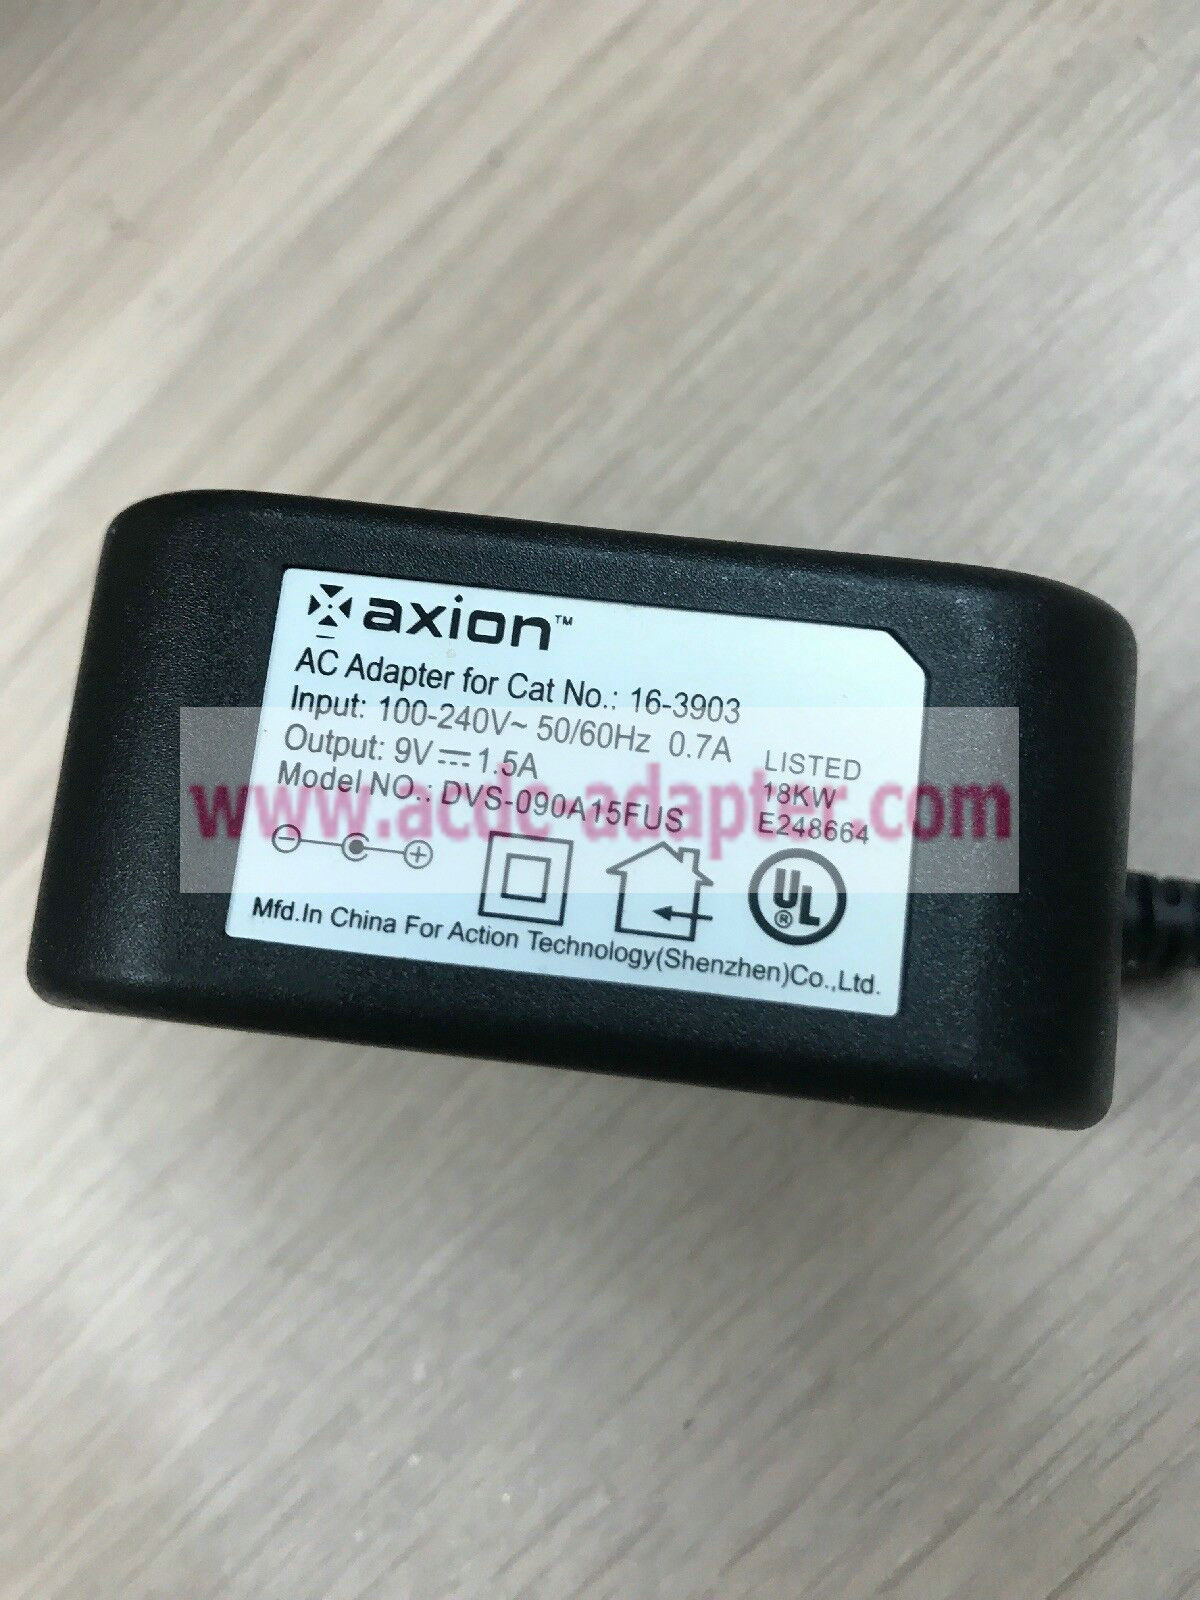 Original 9V 1.5A Axion DVS-090A15FUS AC Power Supply Adapter Charger